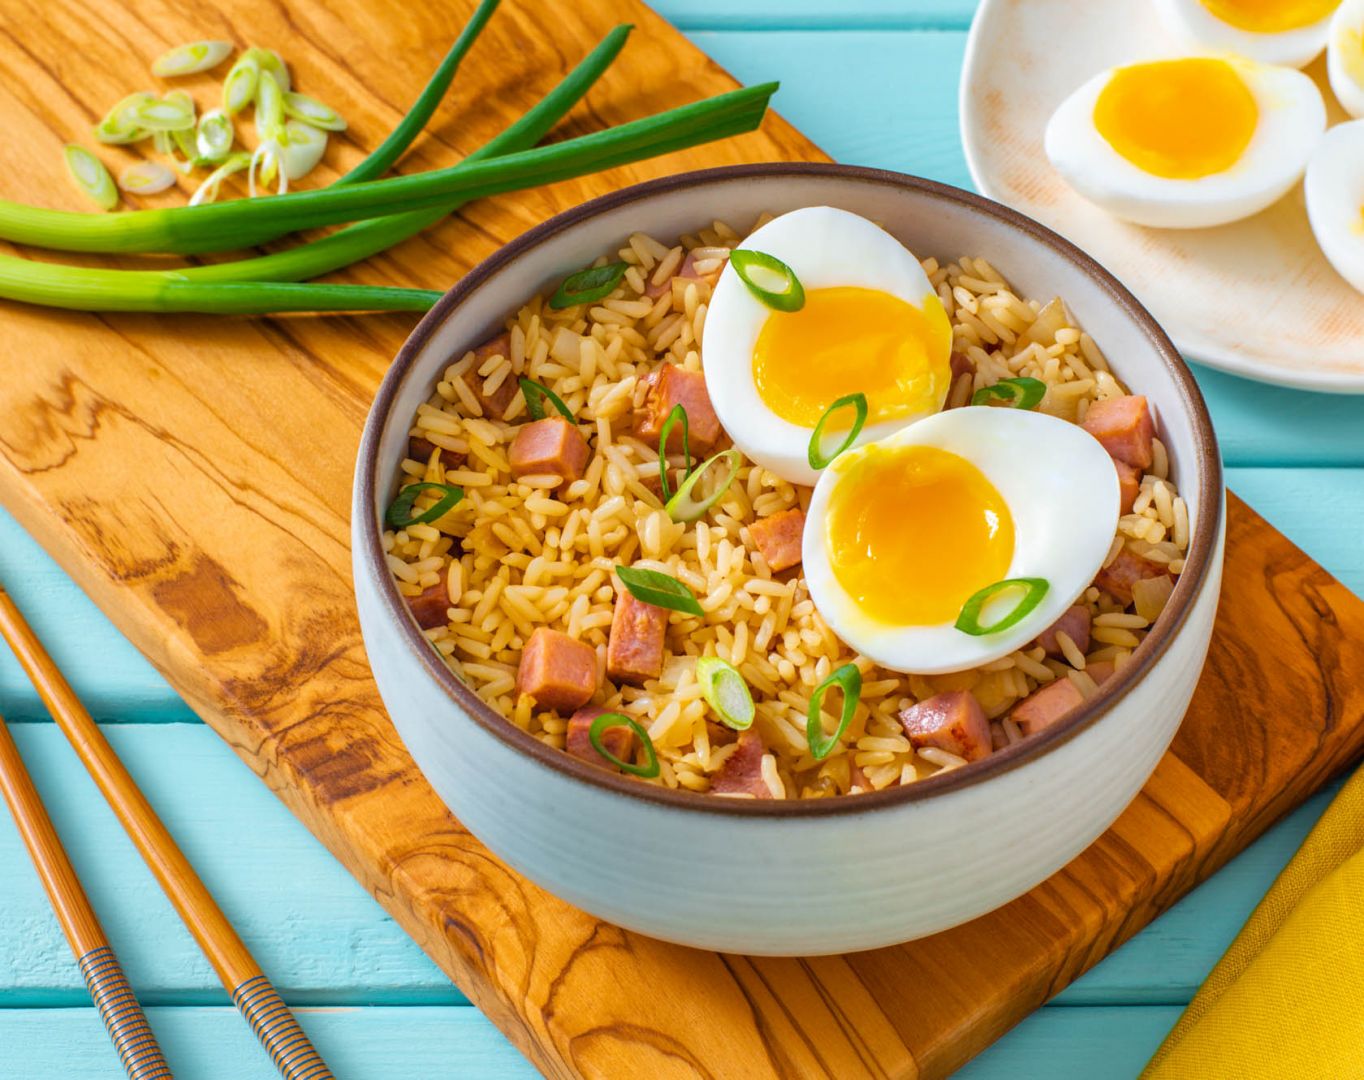 https://minuterice.com/wp-content/uploads/2022/01/SHOYU-RICE-WITH-SOFT-BOILED-EGG-035_1680x1330.jpg